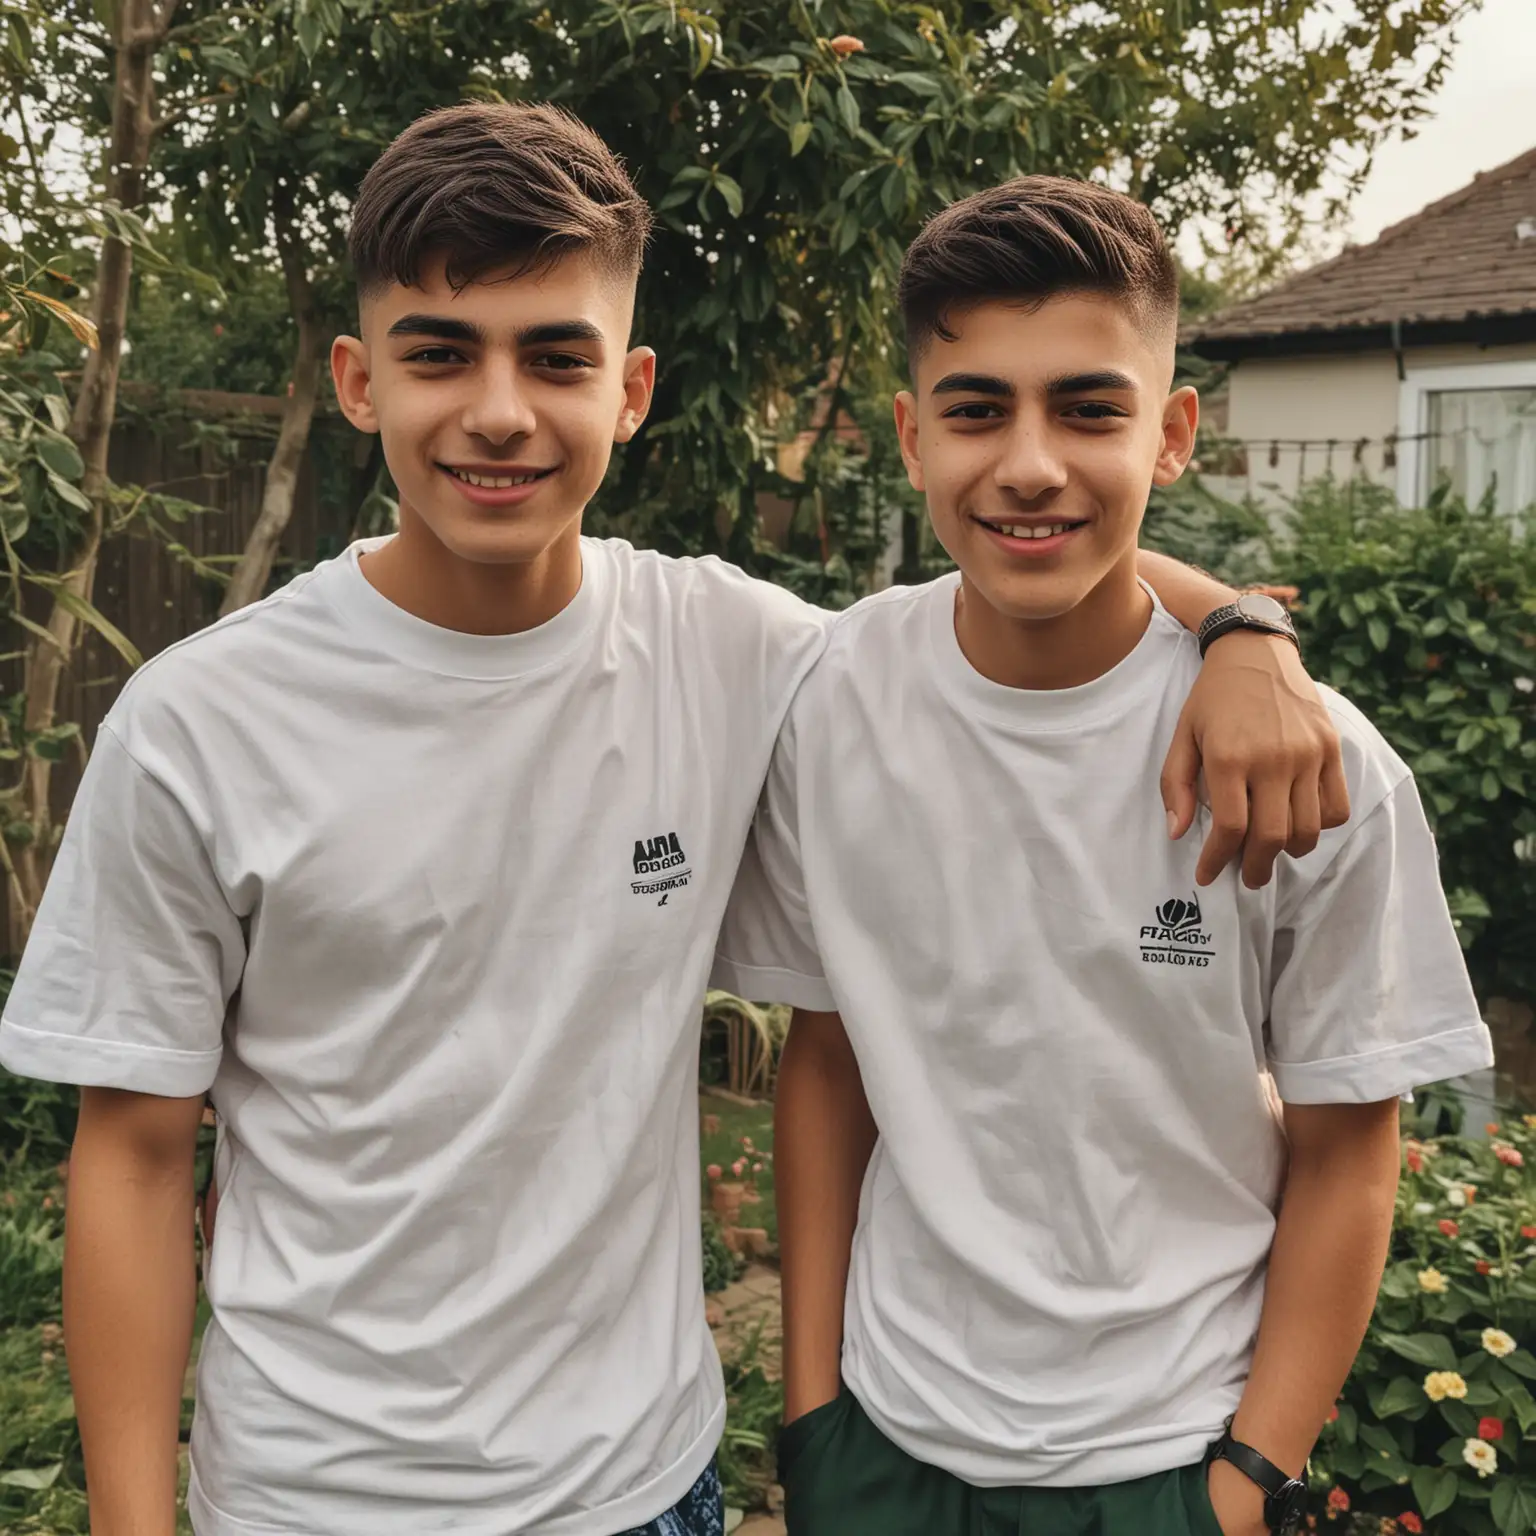 two brothers, one is around 20 years old, the other is around 14 years old, theyre race is persian, they have skin fade haircuts, they are wearing shirts, they are outside having fun in a garden